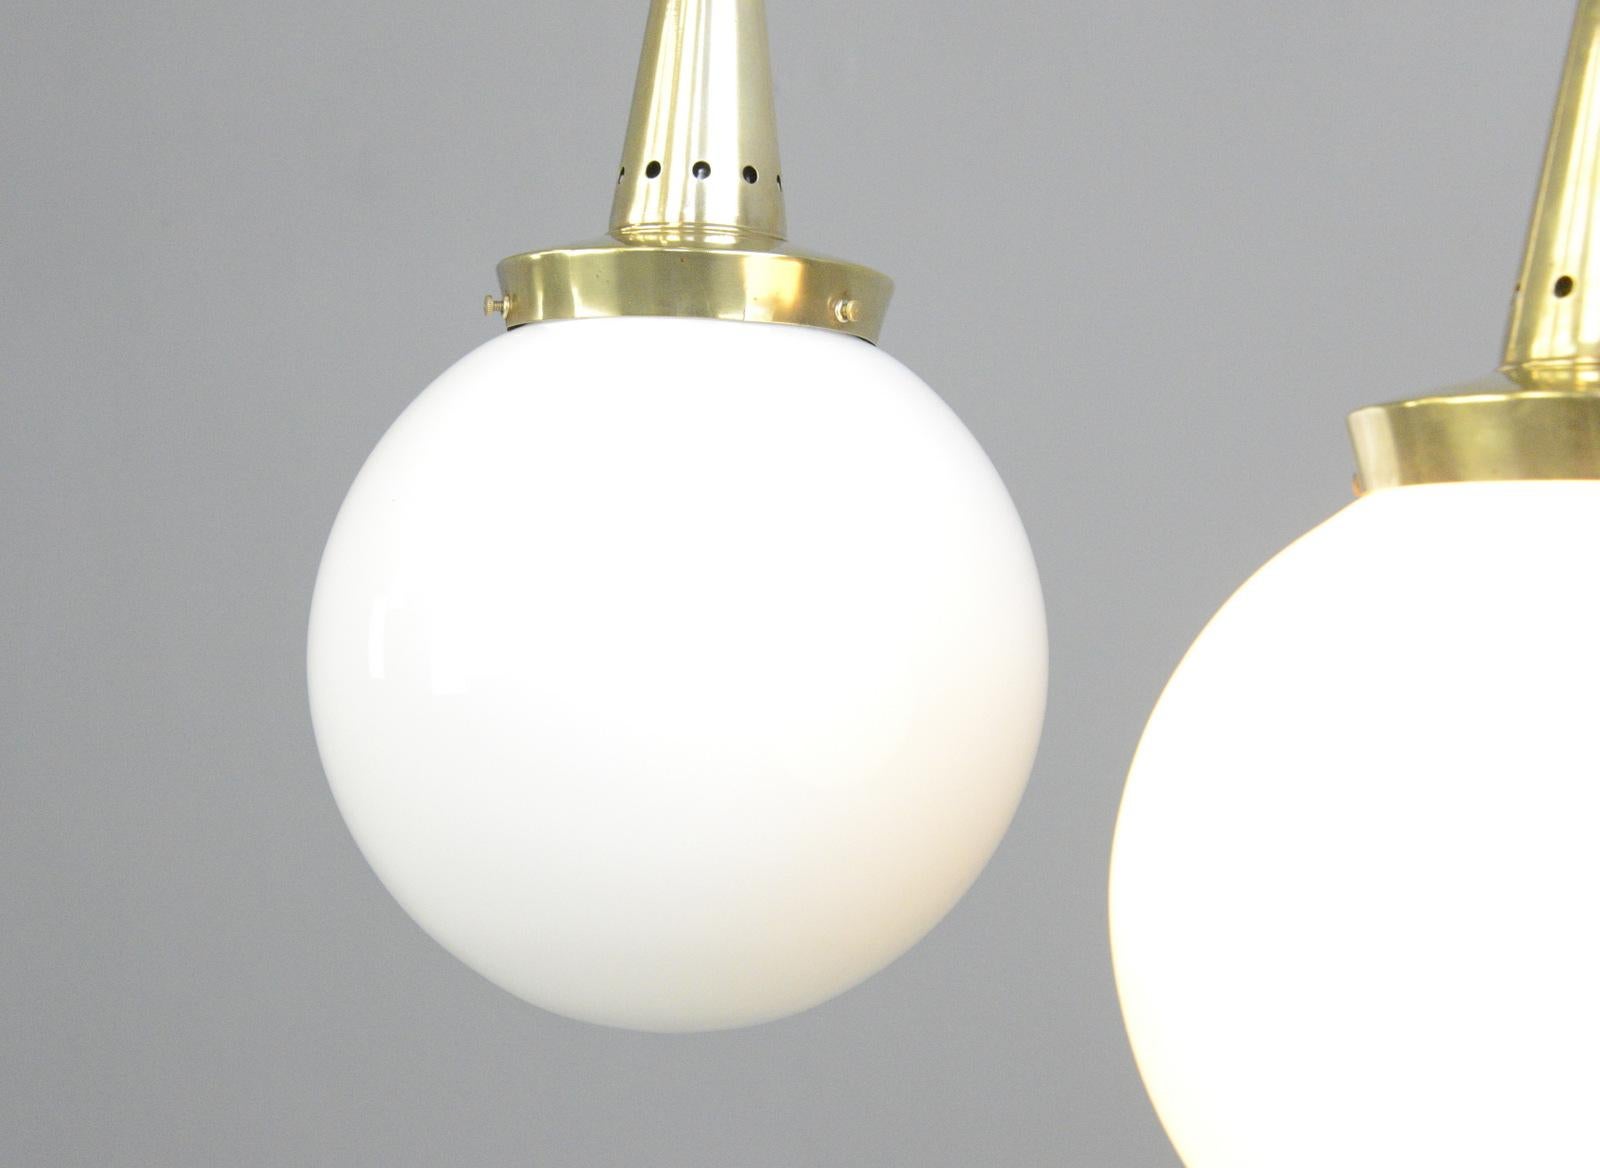 Opaline pendant lights by Marianne Brandt for Schwintzer & Gräff

- Price is per light
- Opaline glass globes
- Conical brass galleries
- Takes E27 fitting bulbs
- Comes with 100cm of brass chain and cable
- Comes with ceiling rose
-